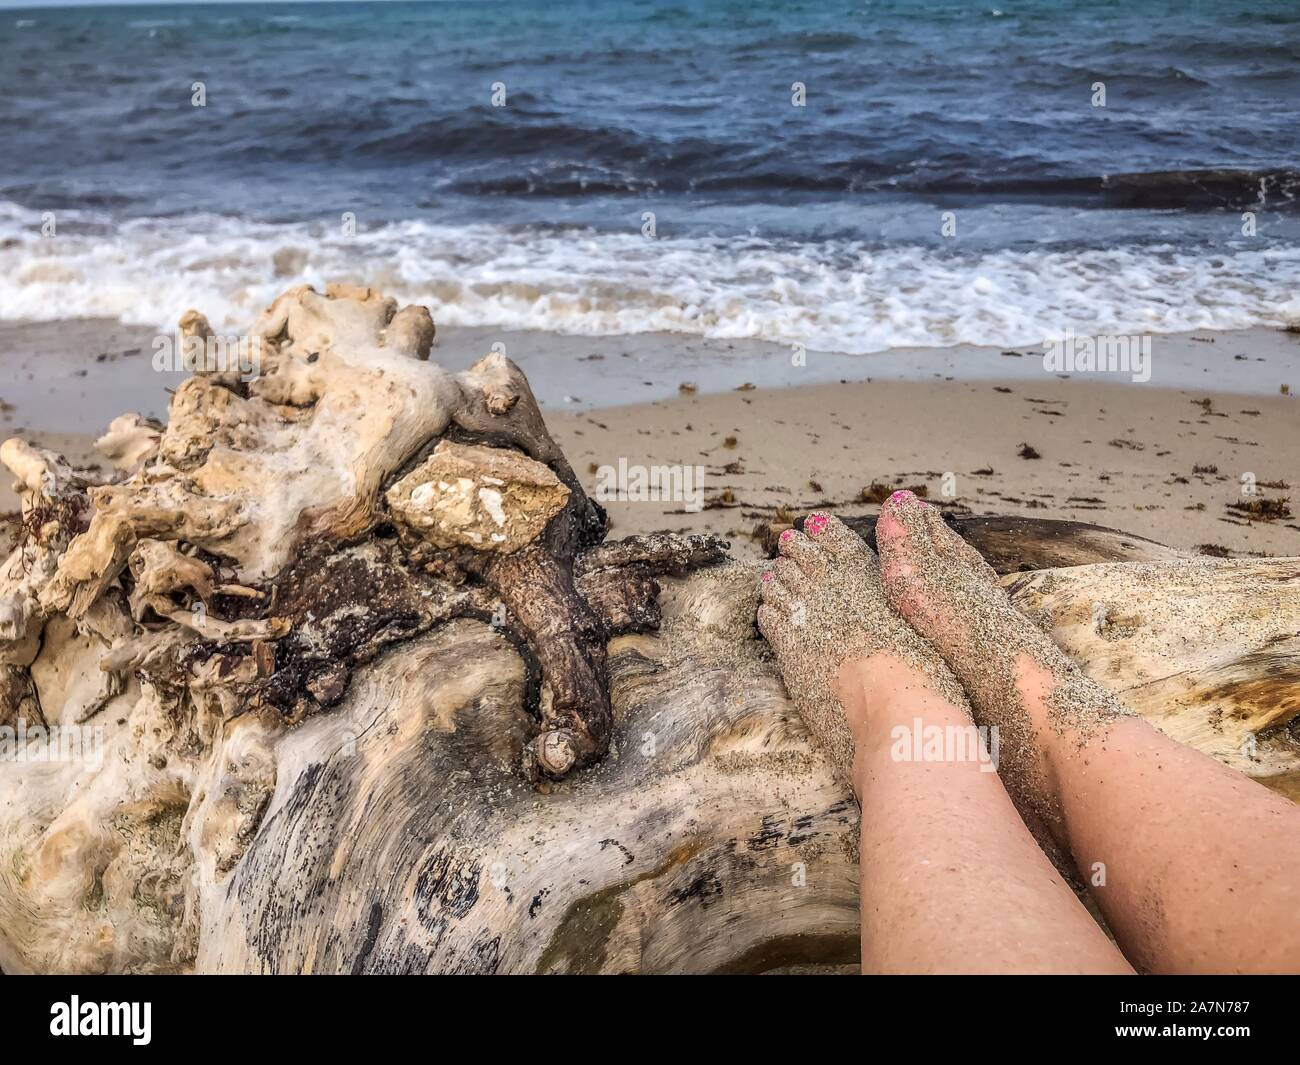 Southern Florida - woman's toes on driftwood at the beach Stock Photo